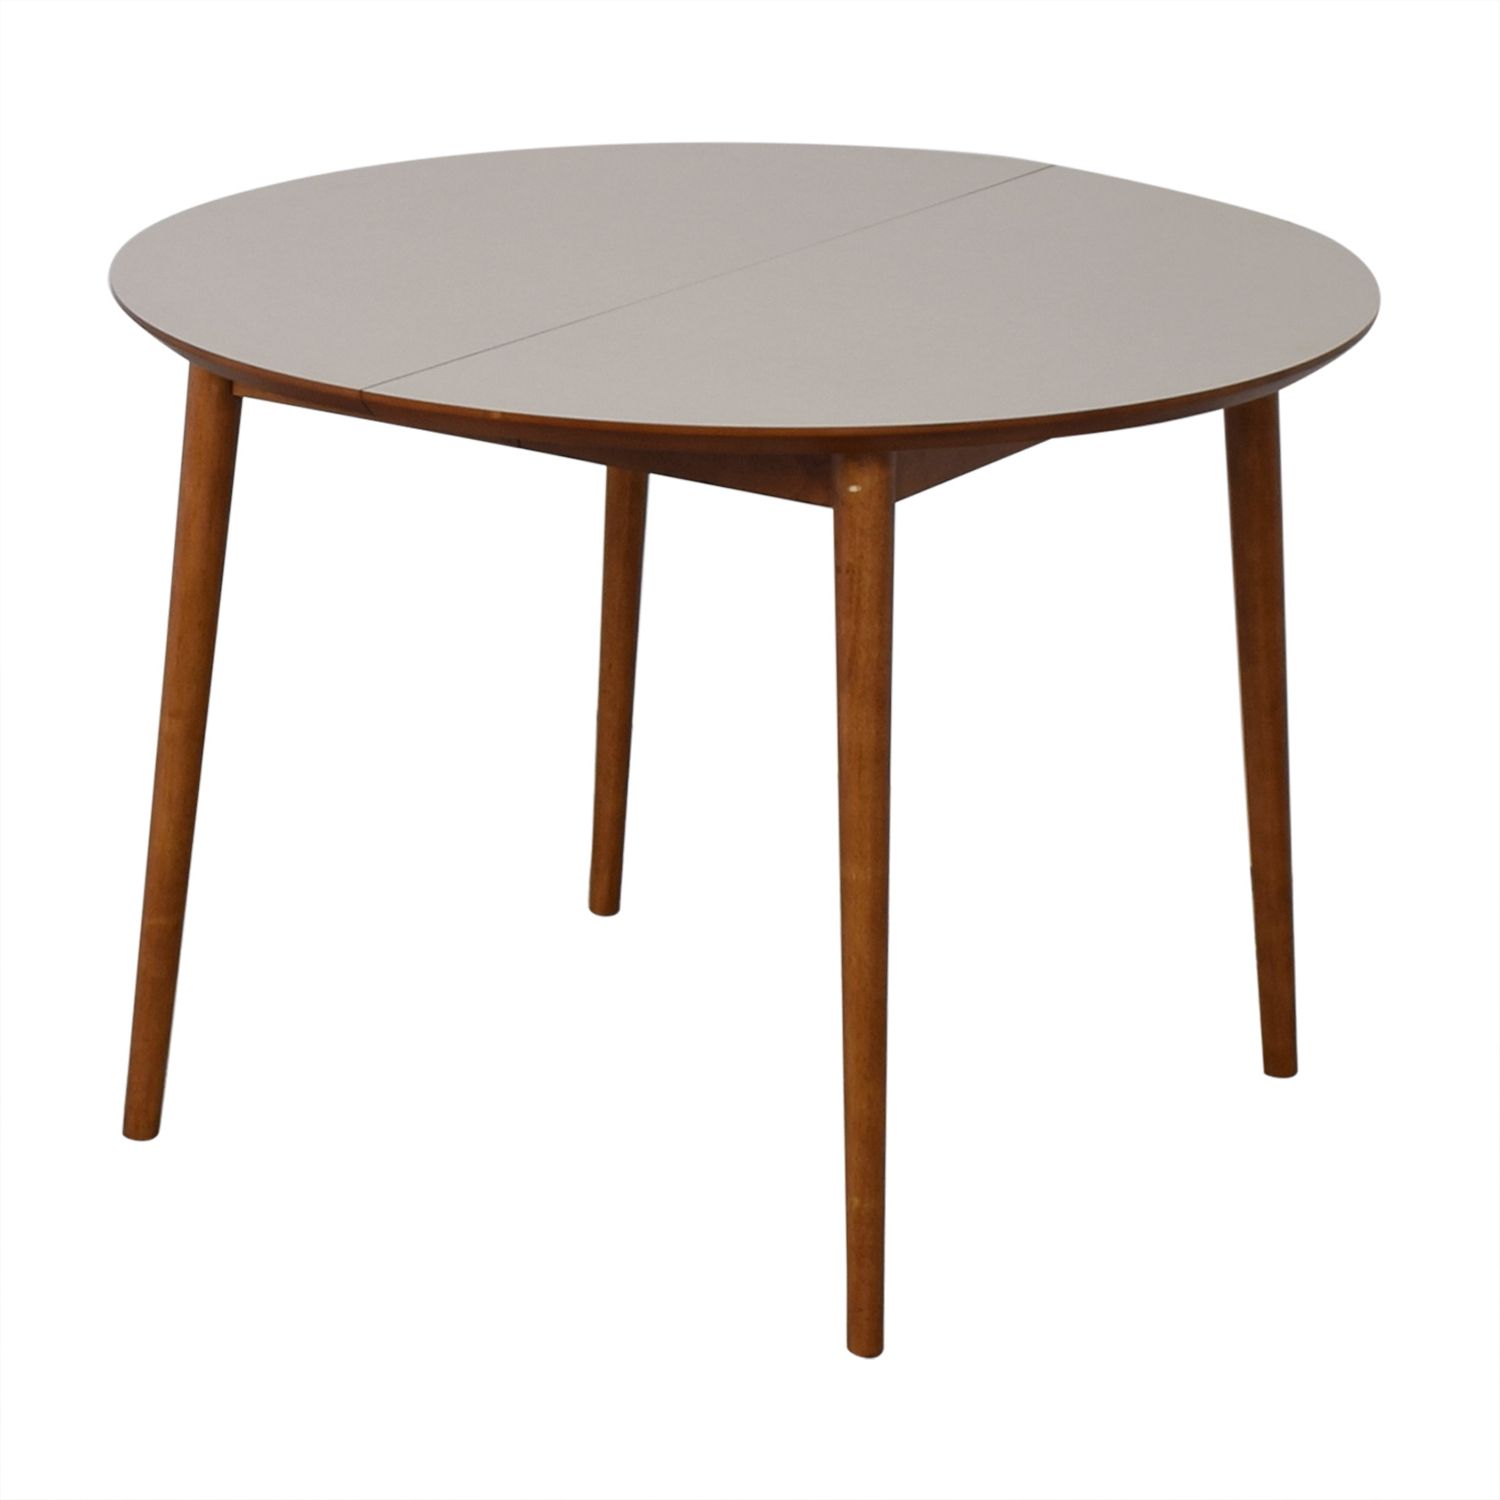 [%49% Off – West Elm West Elm Fishs Eddy Expandable Dining Within Widely Used 49'' Dining Tables|49'' Dining Tables In Newest 49% Off – West Elm West Elm Fishs Eddy Expandable Dining|recent 49'' Dining Tables With Regard To 49% Off – West Elm West Elm Fishs Eddy Expandable Dining|popular 49% Off – West Elm West Elm Fishs Eddy Expandable Dining Regarding 49'' Dining Tables%] (Gallery 16 of 20)